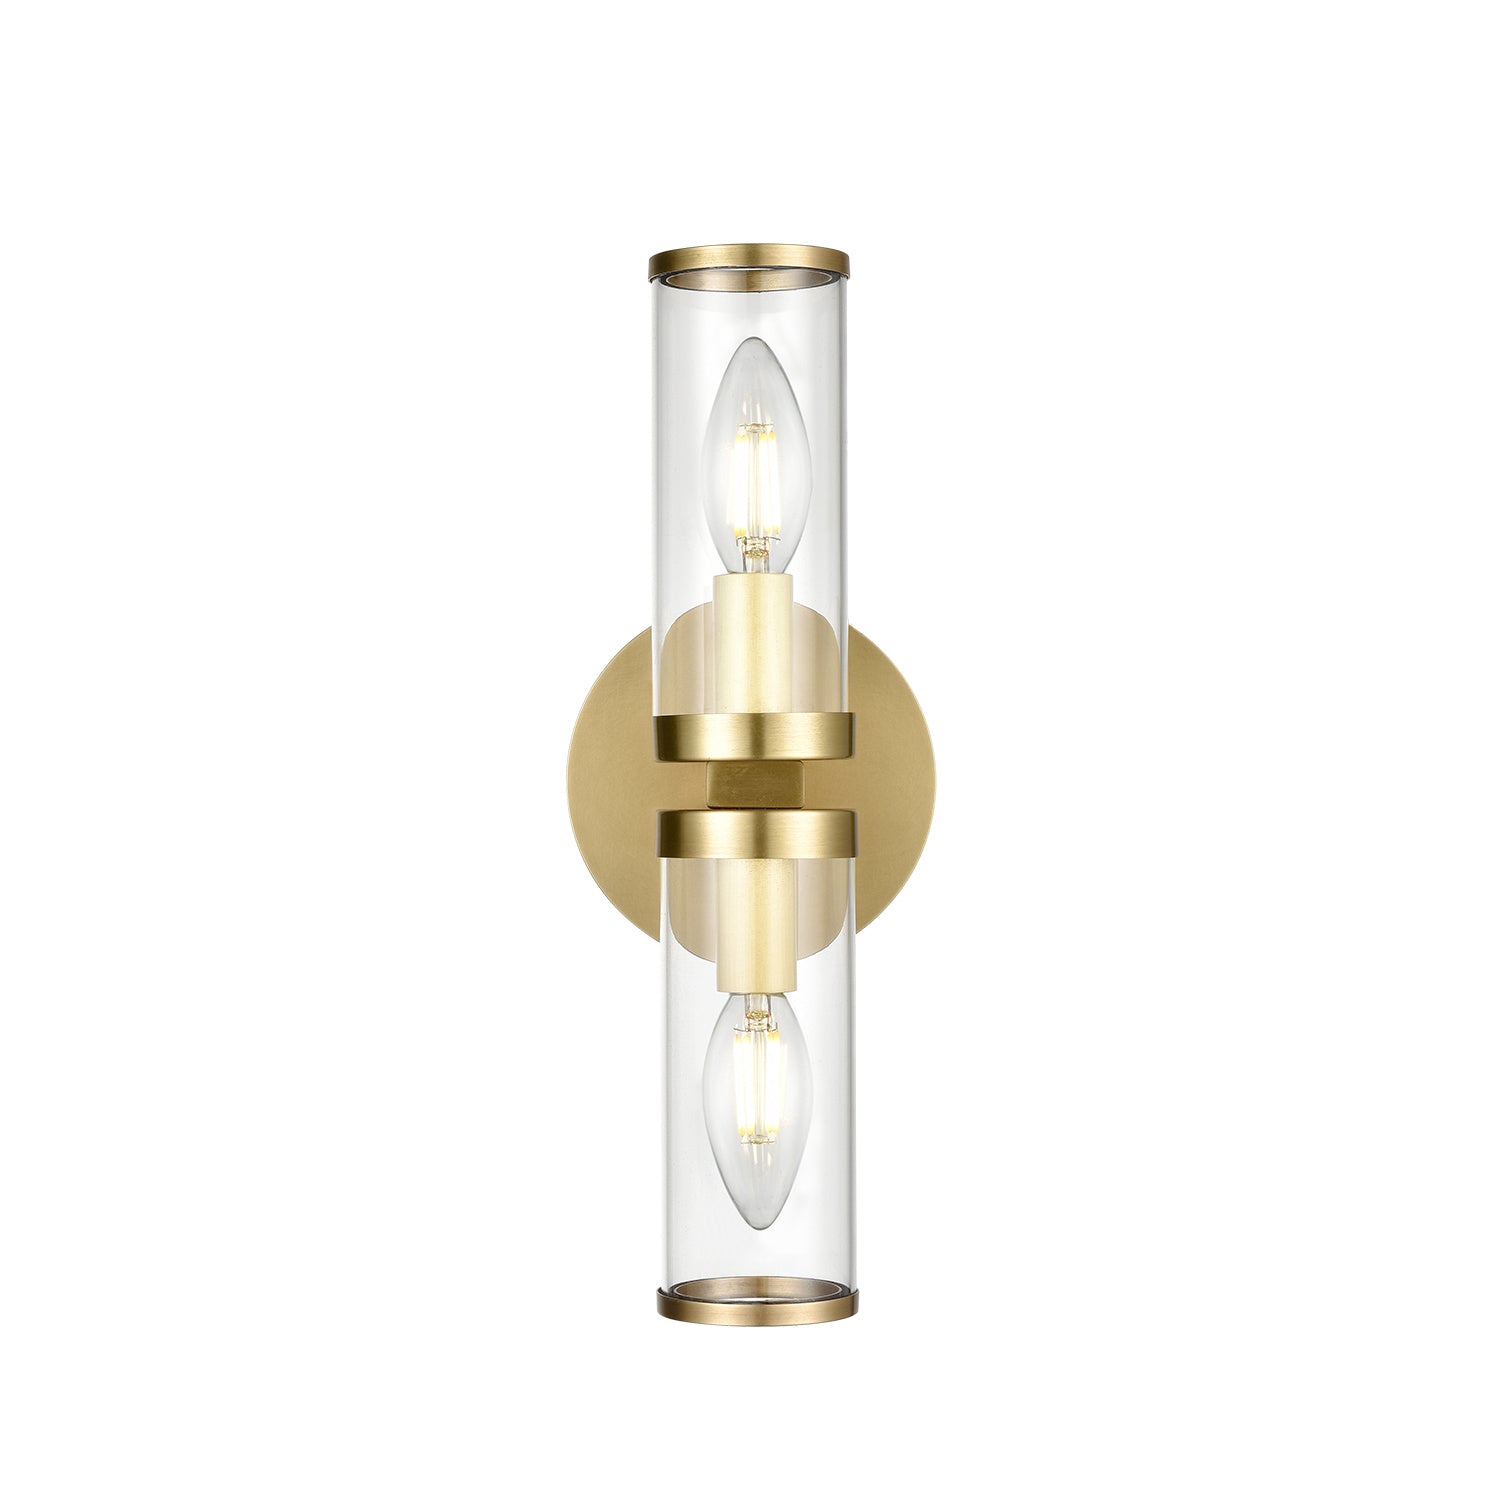 Alora - WV309002NBCG - Two Light Wall Sconce - Revolve - Clear Glass/Natural Brass